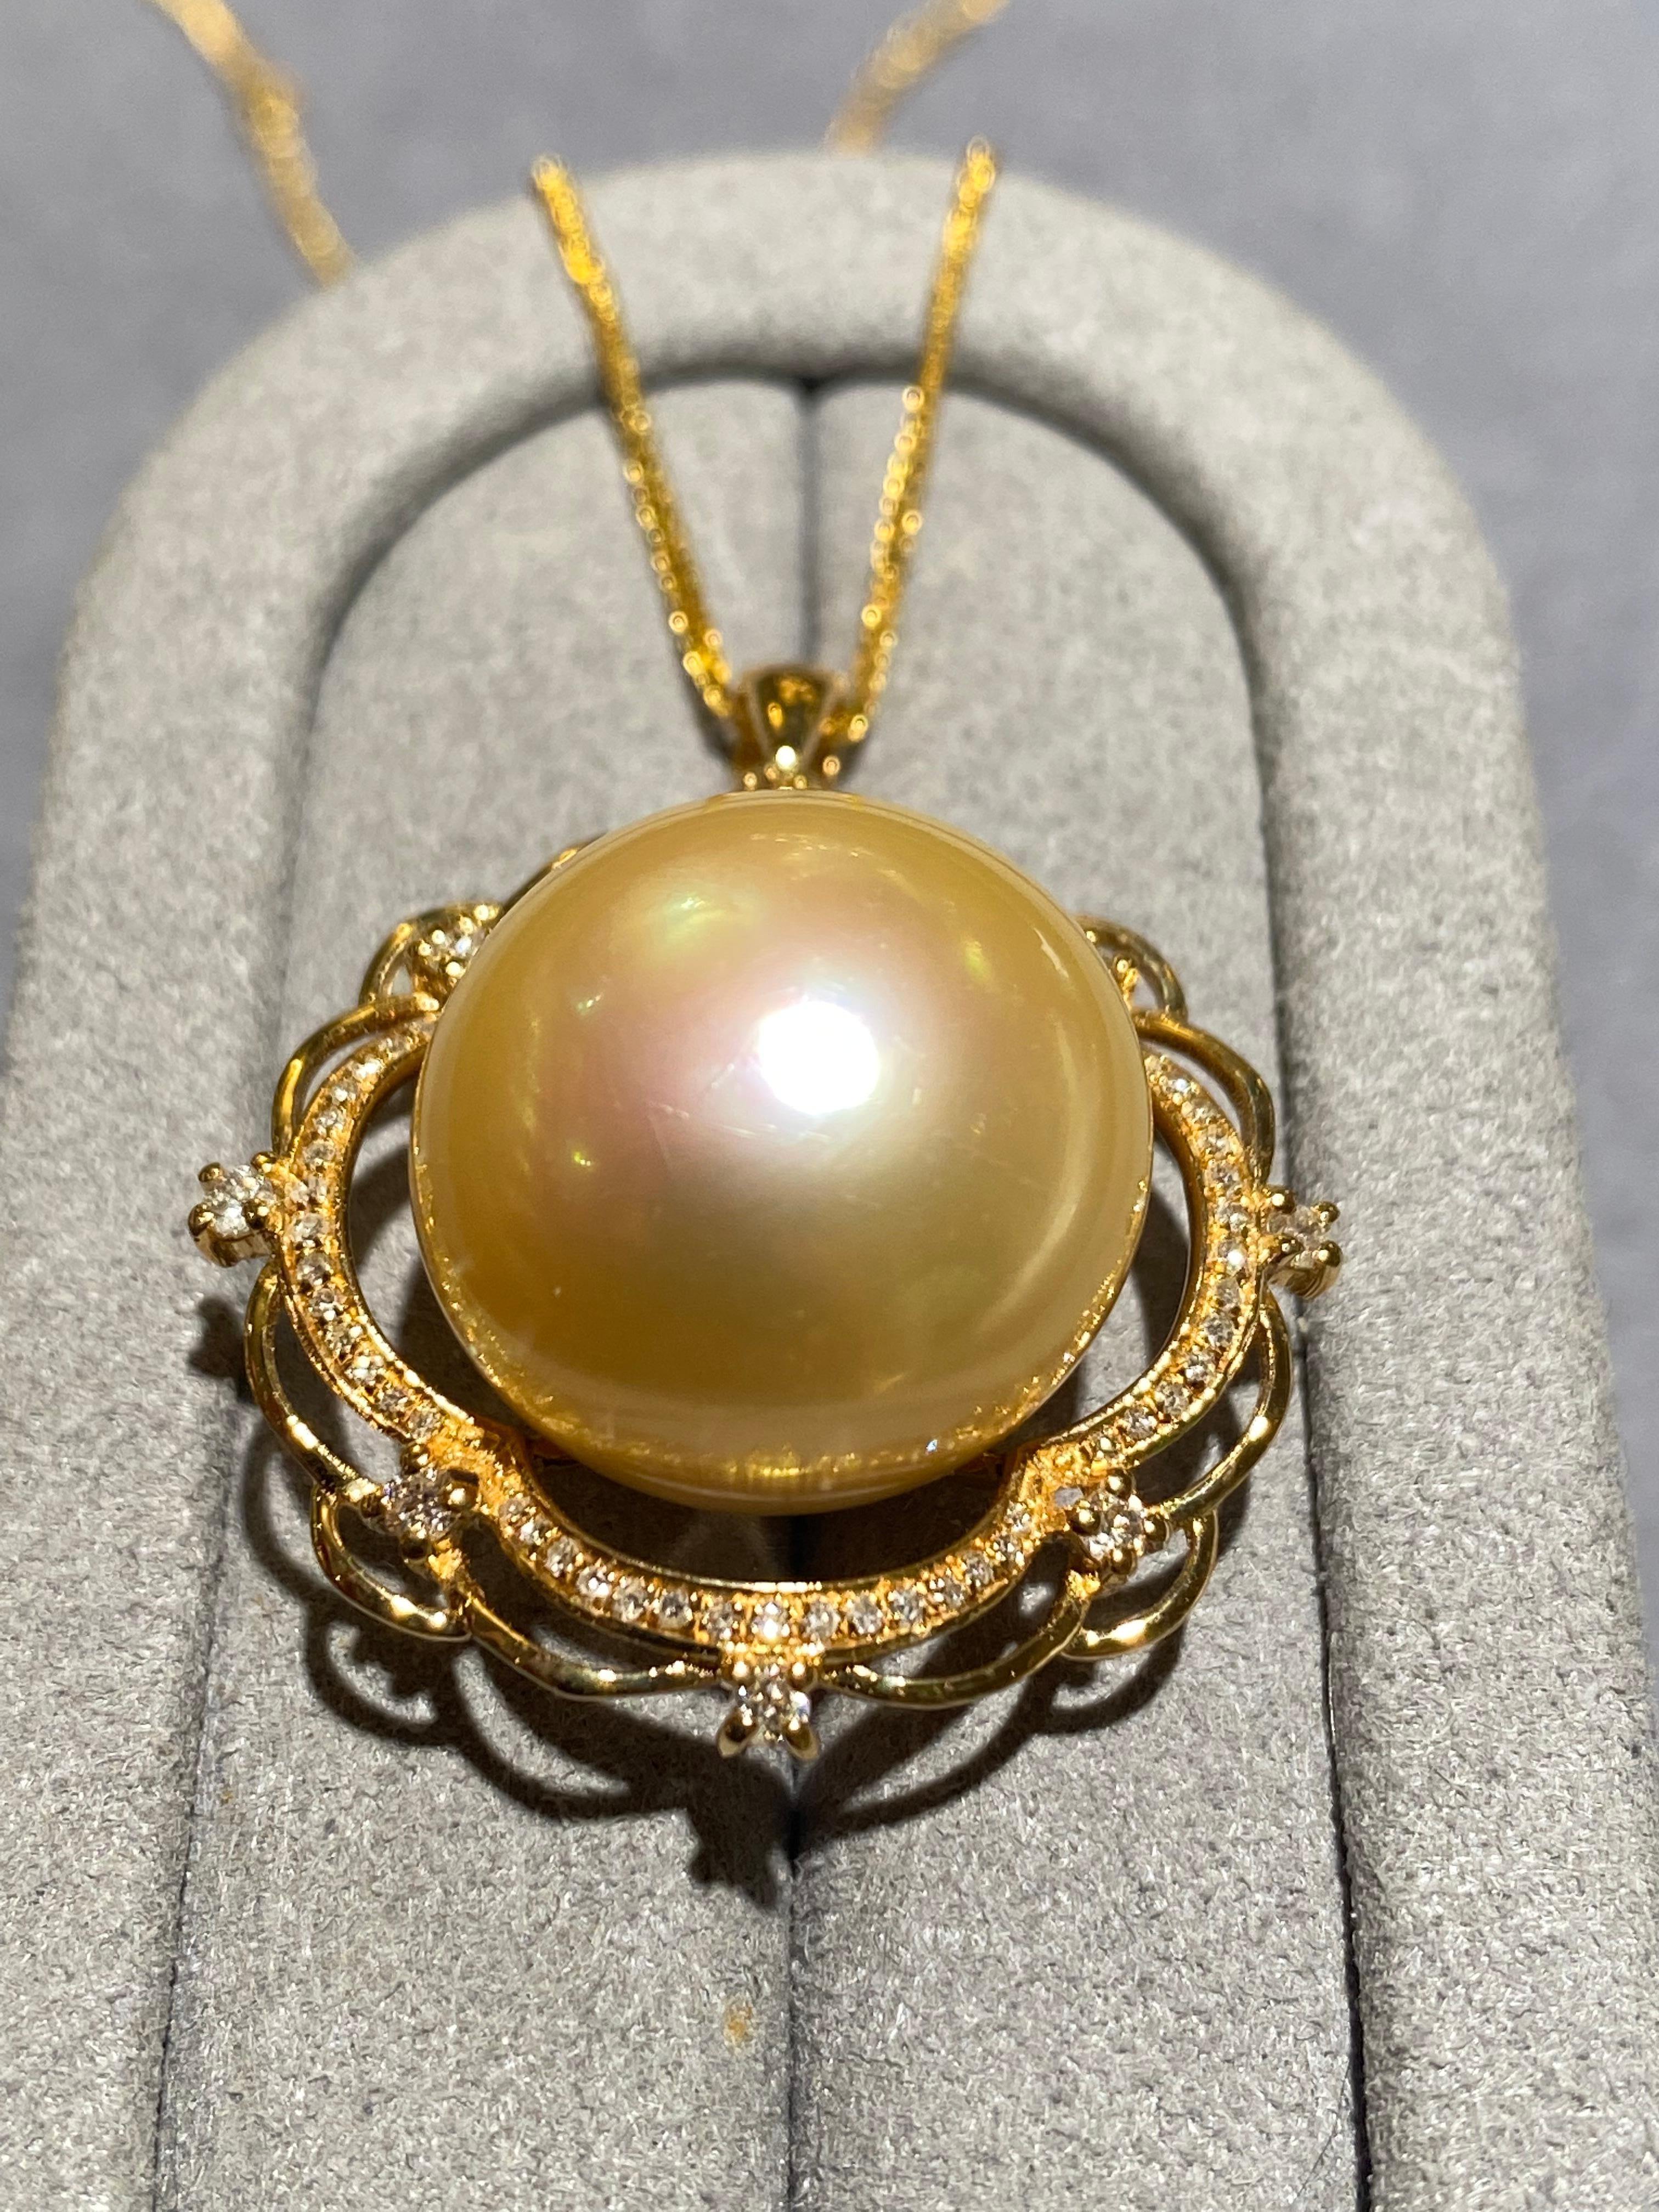 A 17.2 mm golden south sea pearl is set in the middle of a floral motif pendant in 18k yellow gold. There are 8 diamonds set around the peripheral of the pendant. The inner circle of the pendant however is set with a circle of full micro diamond